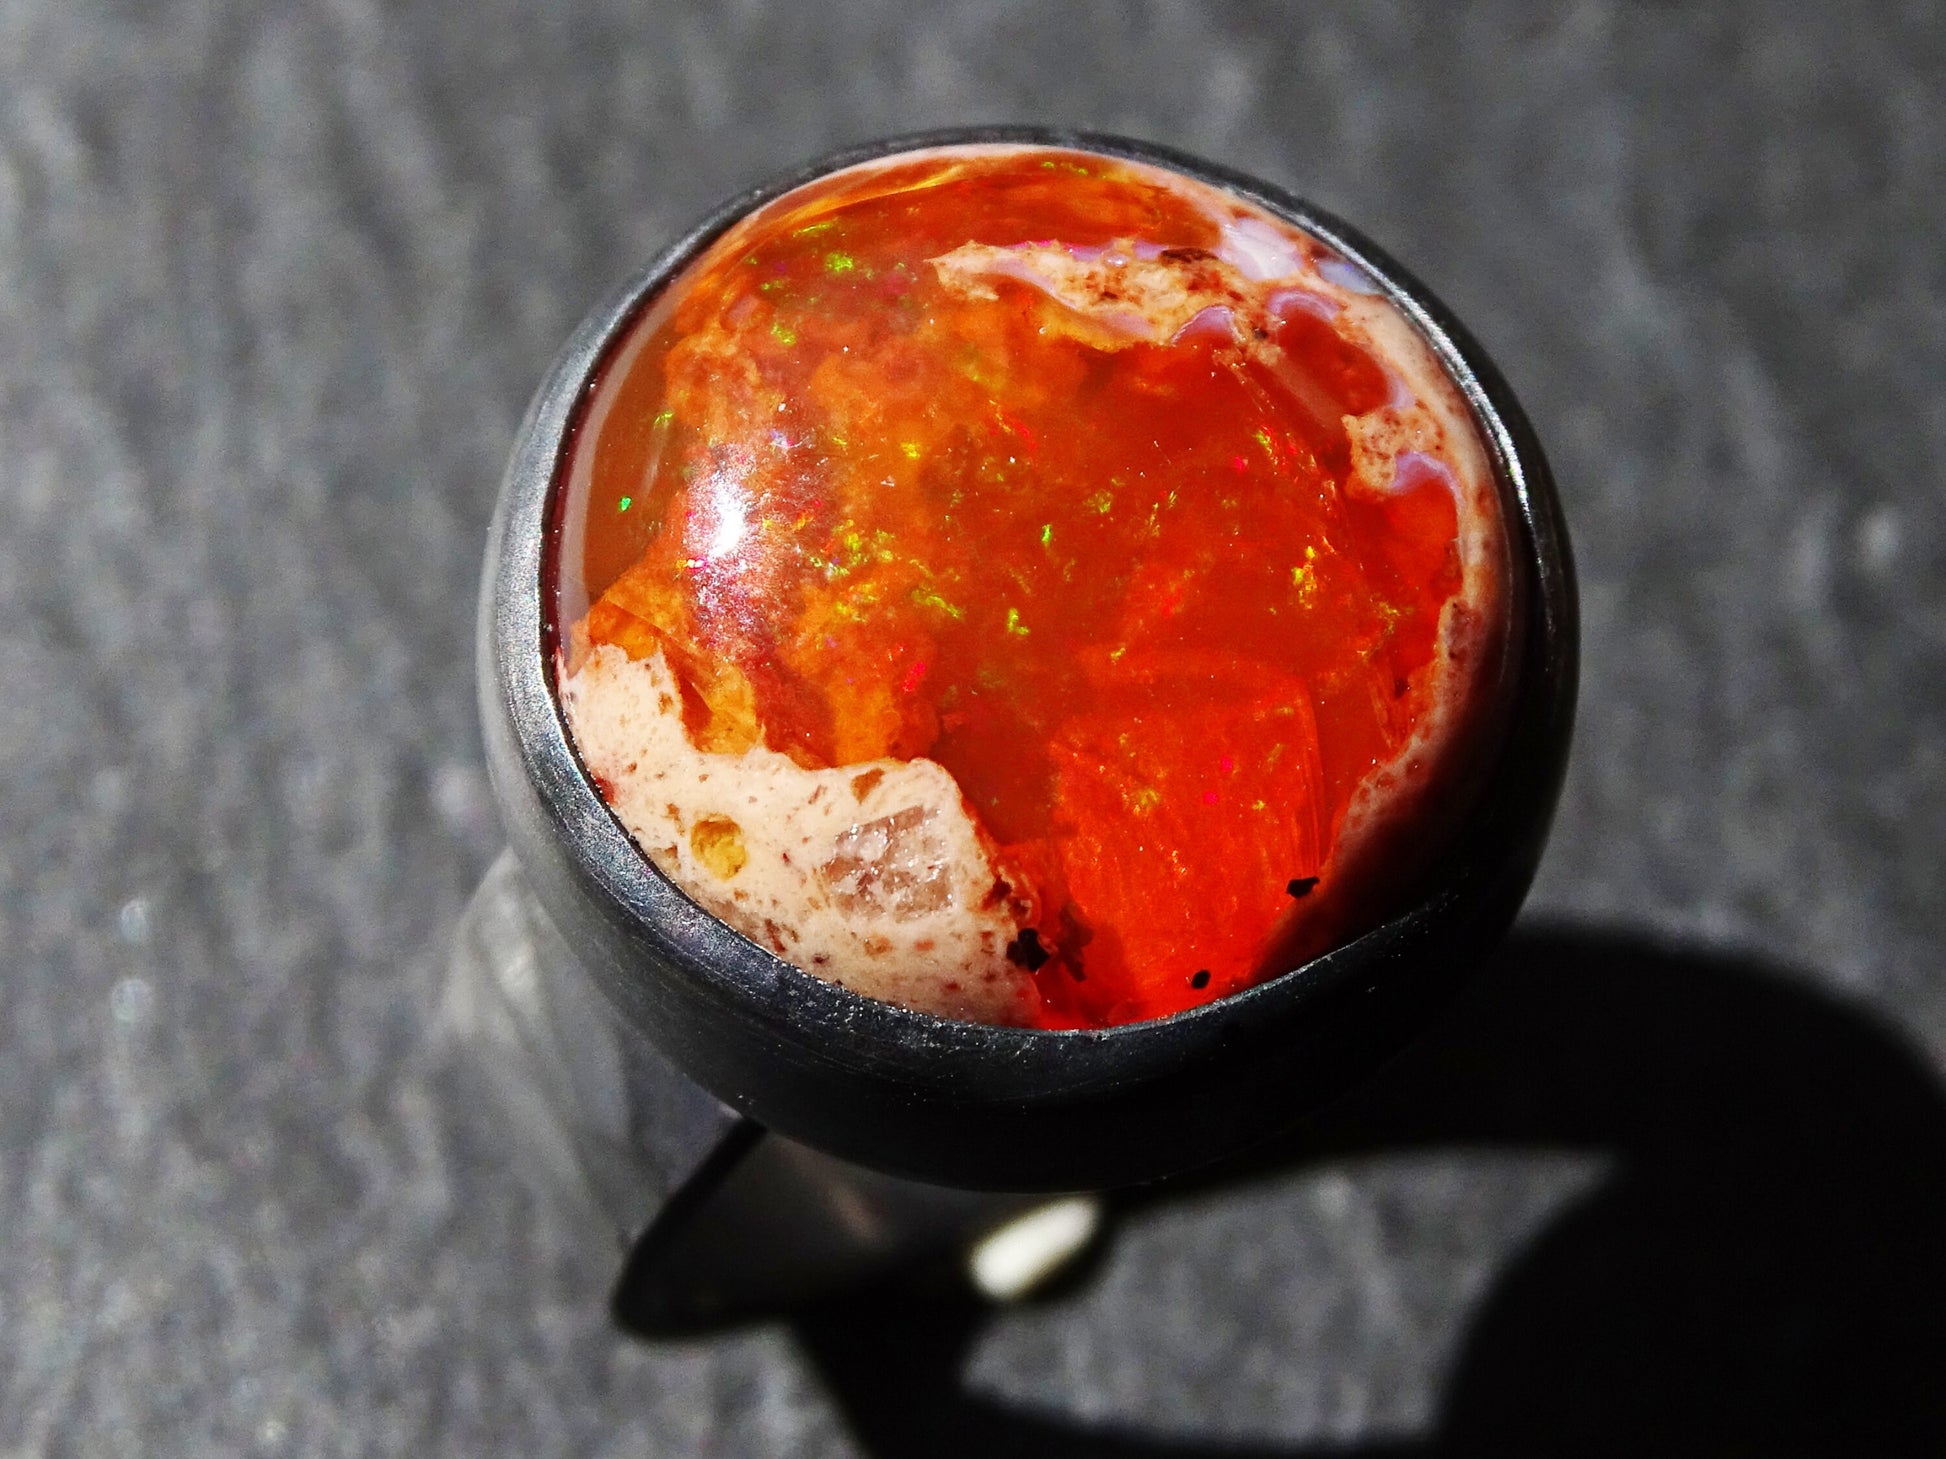 large orange fire opal ring in black silver, size US 7 1/4 - CrazyAss Jewelry Designs